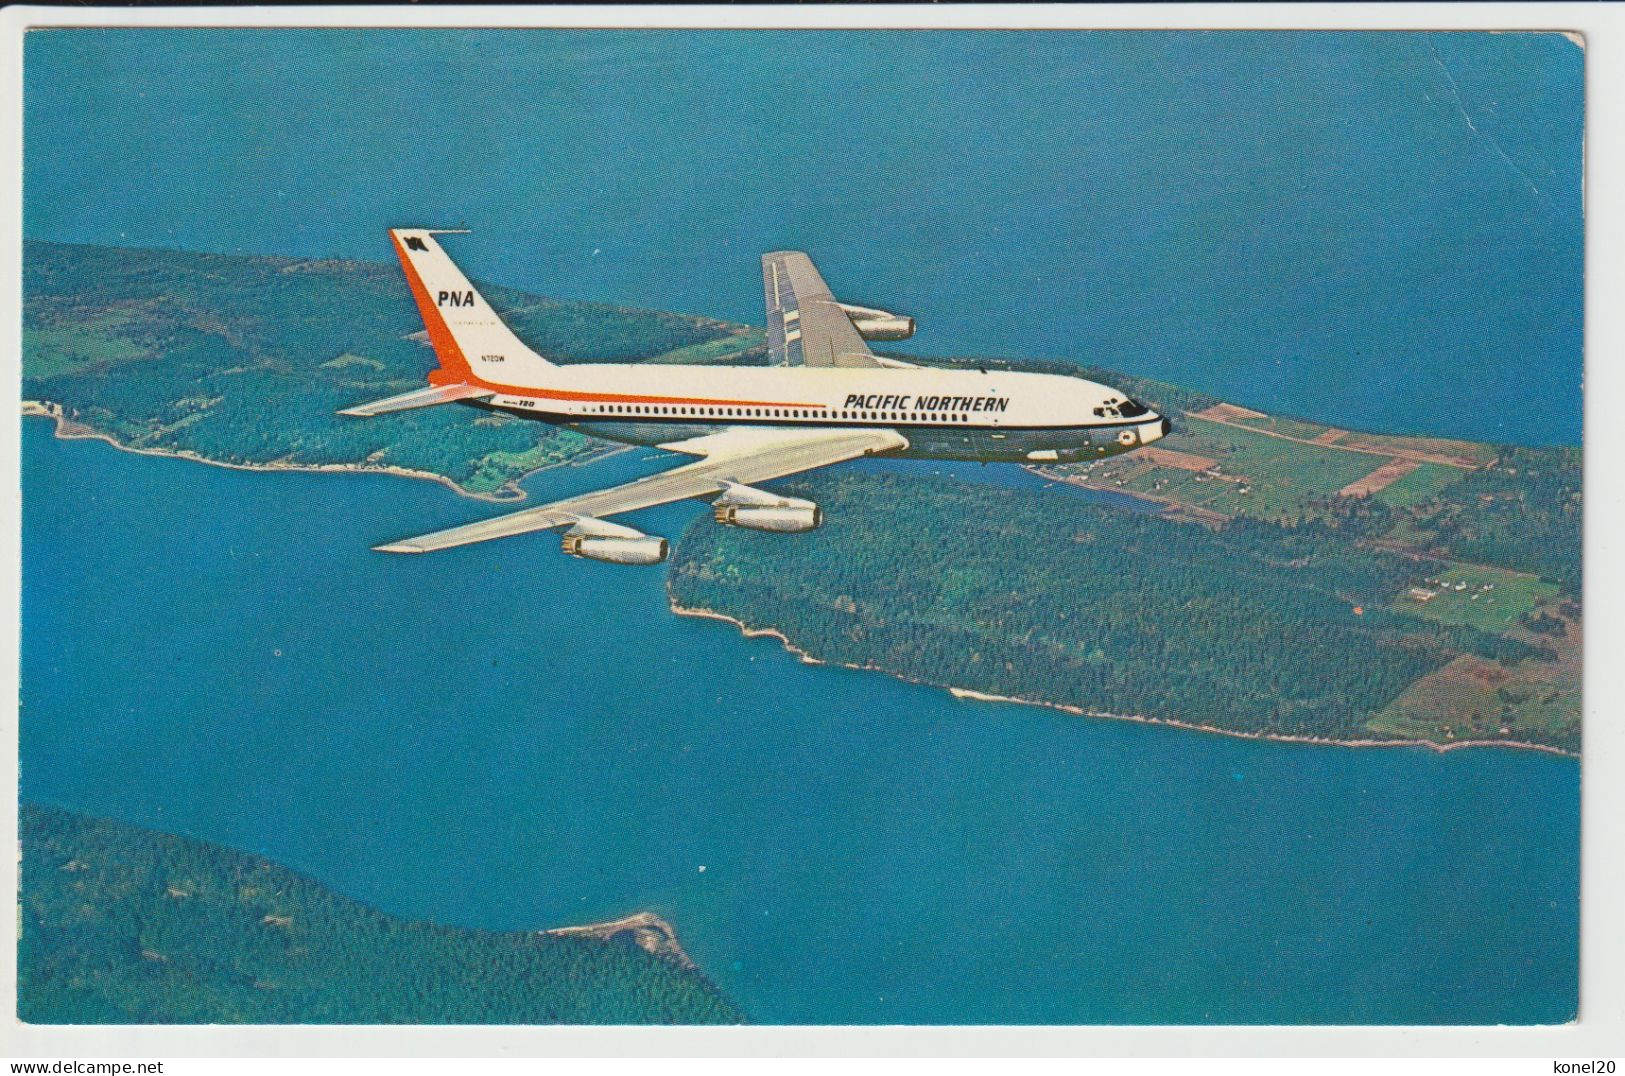 Vintage Pc PNA Pacific Northern Airlines Boeing 720 Aircraft - 1919-1938: Interbellum